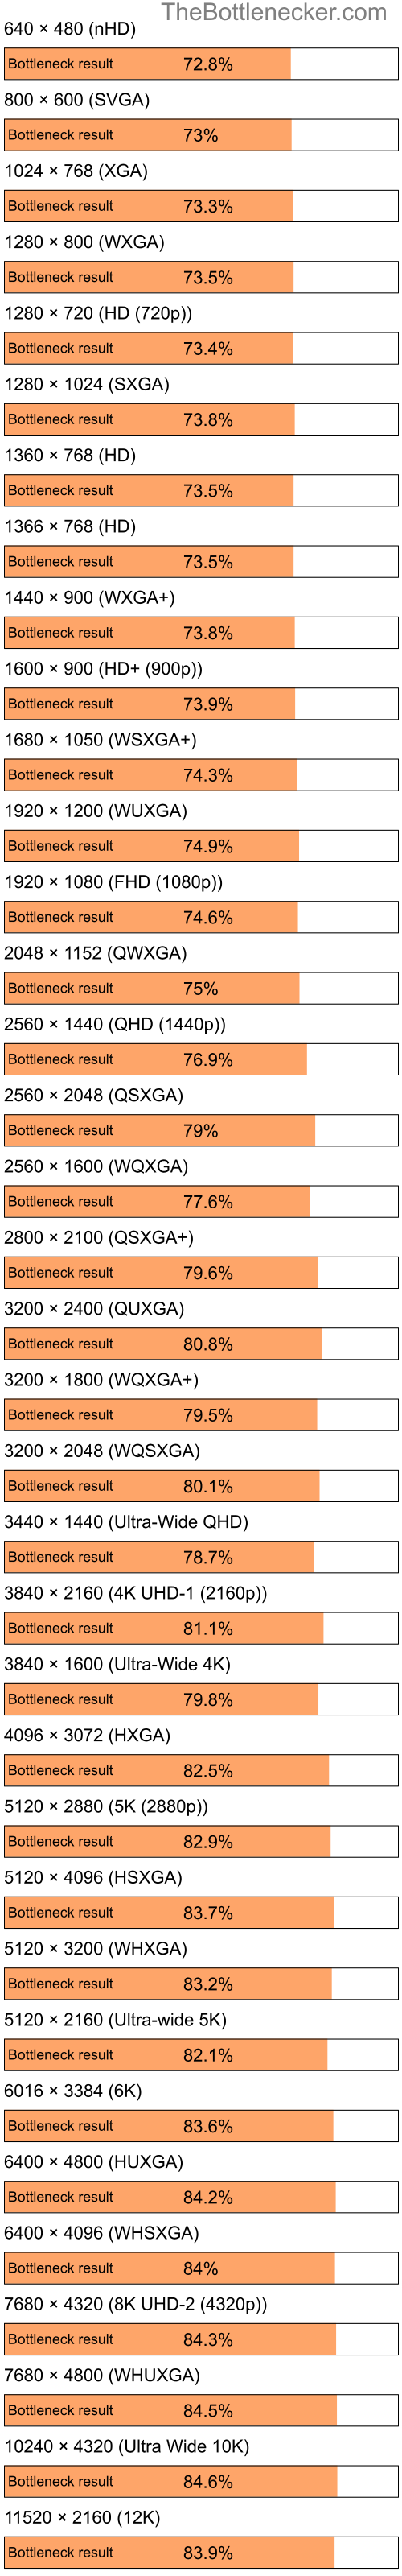 Bottleneck results by resolution for Intel Atom Z520 and AMD Radeon HD 2350 in Graphic Card Intense Tasks